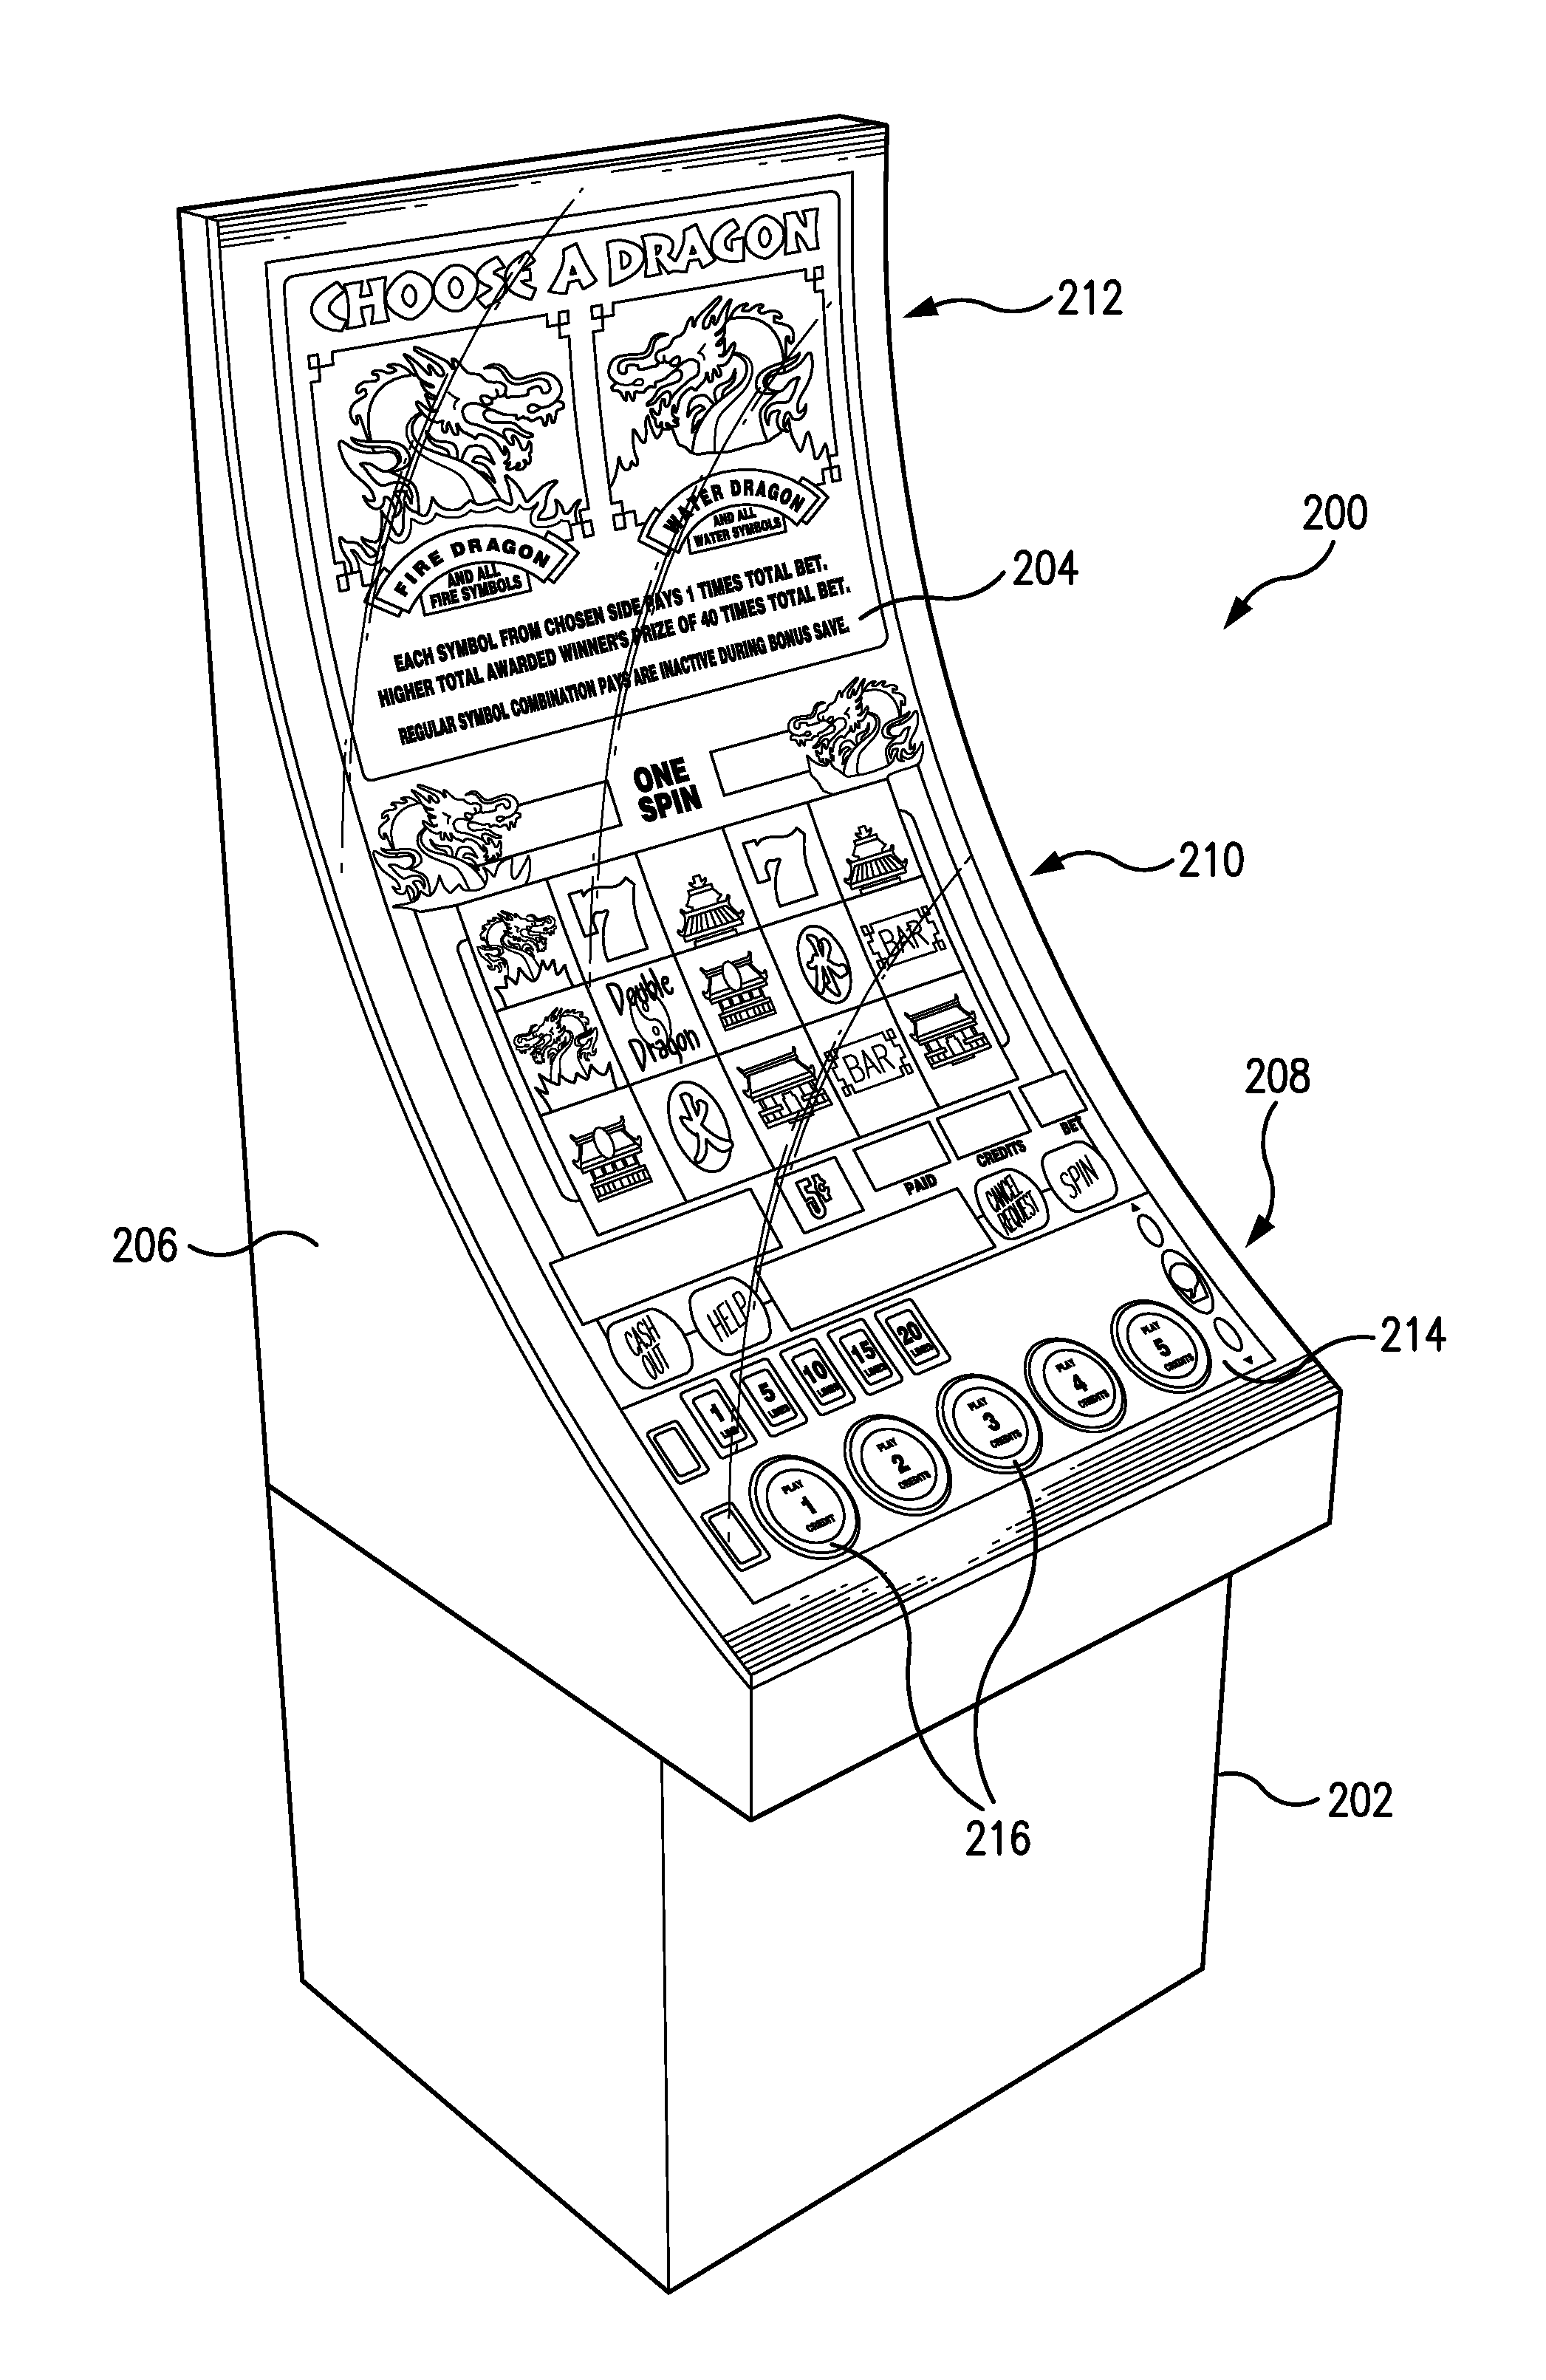 Video terminal having a curved, unified display